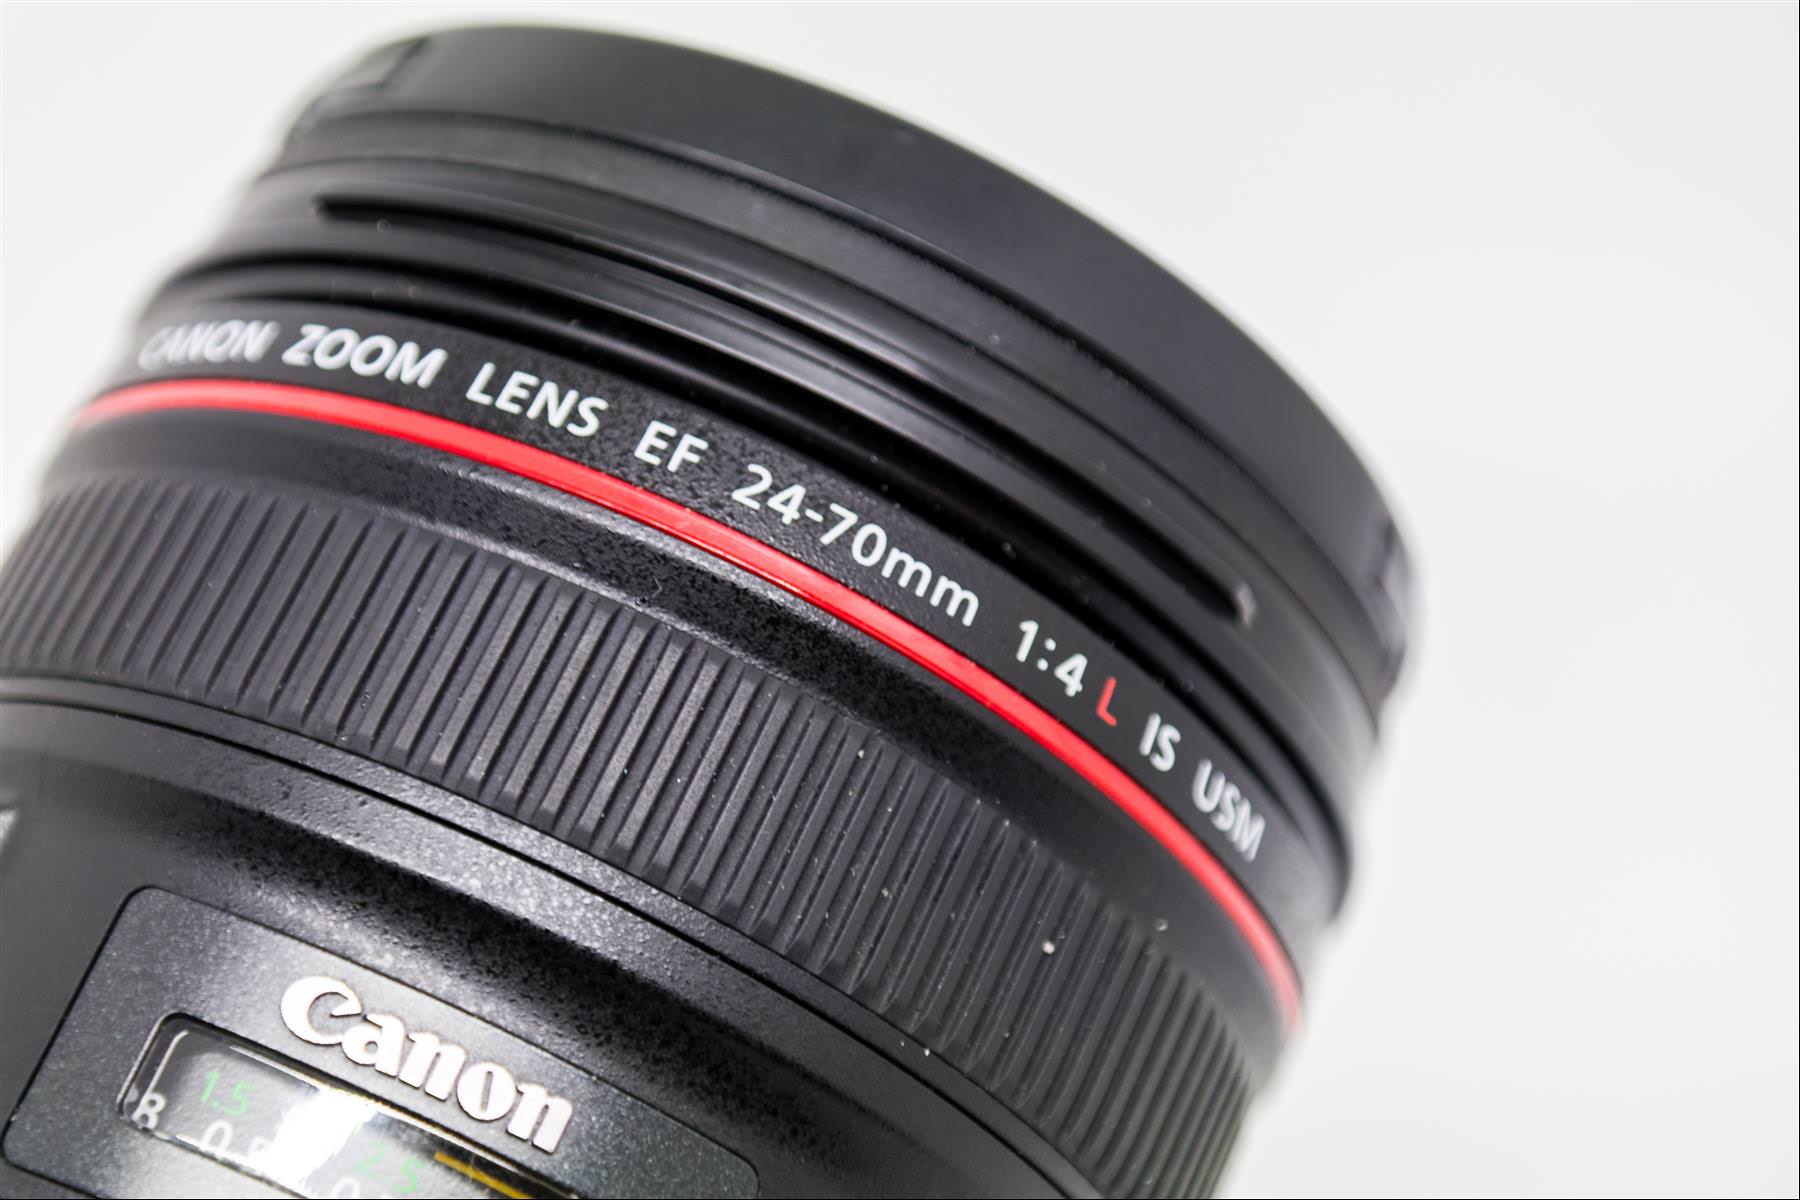 Canon EF 24-70mm F4L IS